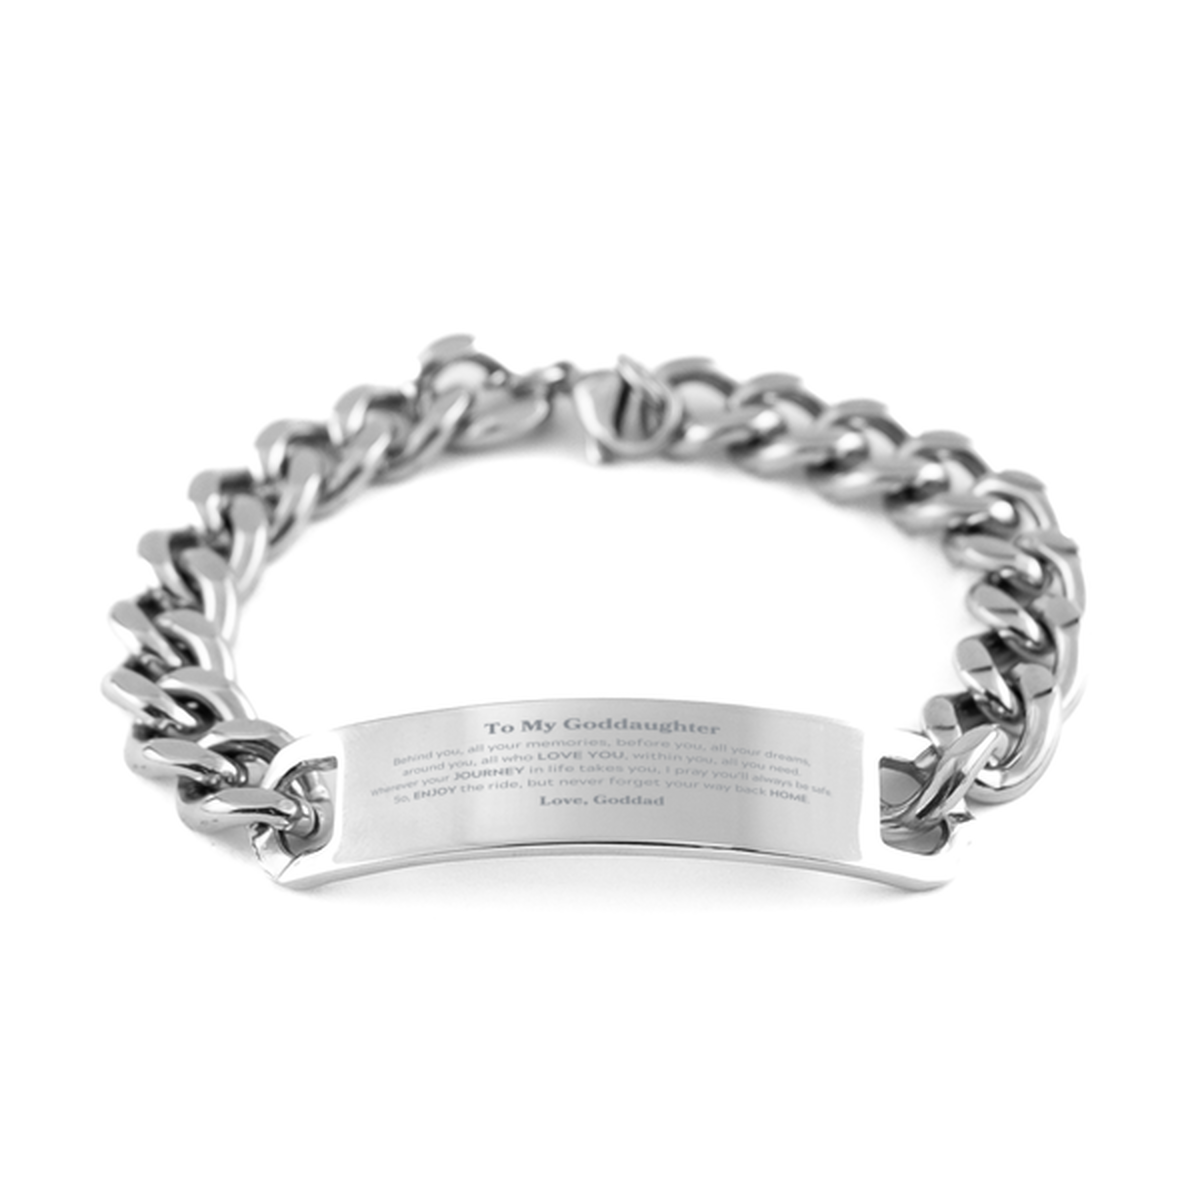 To My Goddaughter Graduation Gifts from Goddad, Goddaughter Cuban Chain Stainless Steel Bracelet Christmas Birthday Gifts for Goddaughter Behind you, all your memories, before you, all your dreams. Love, Goddad